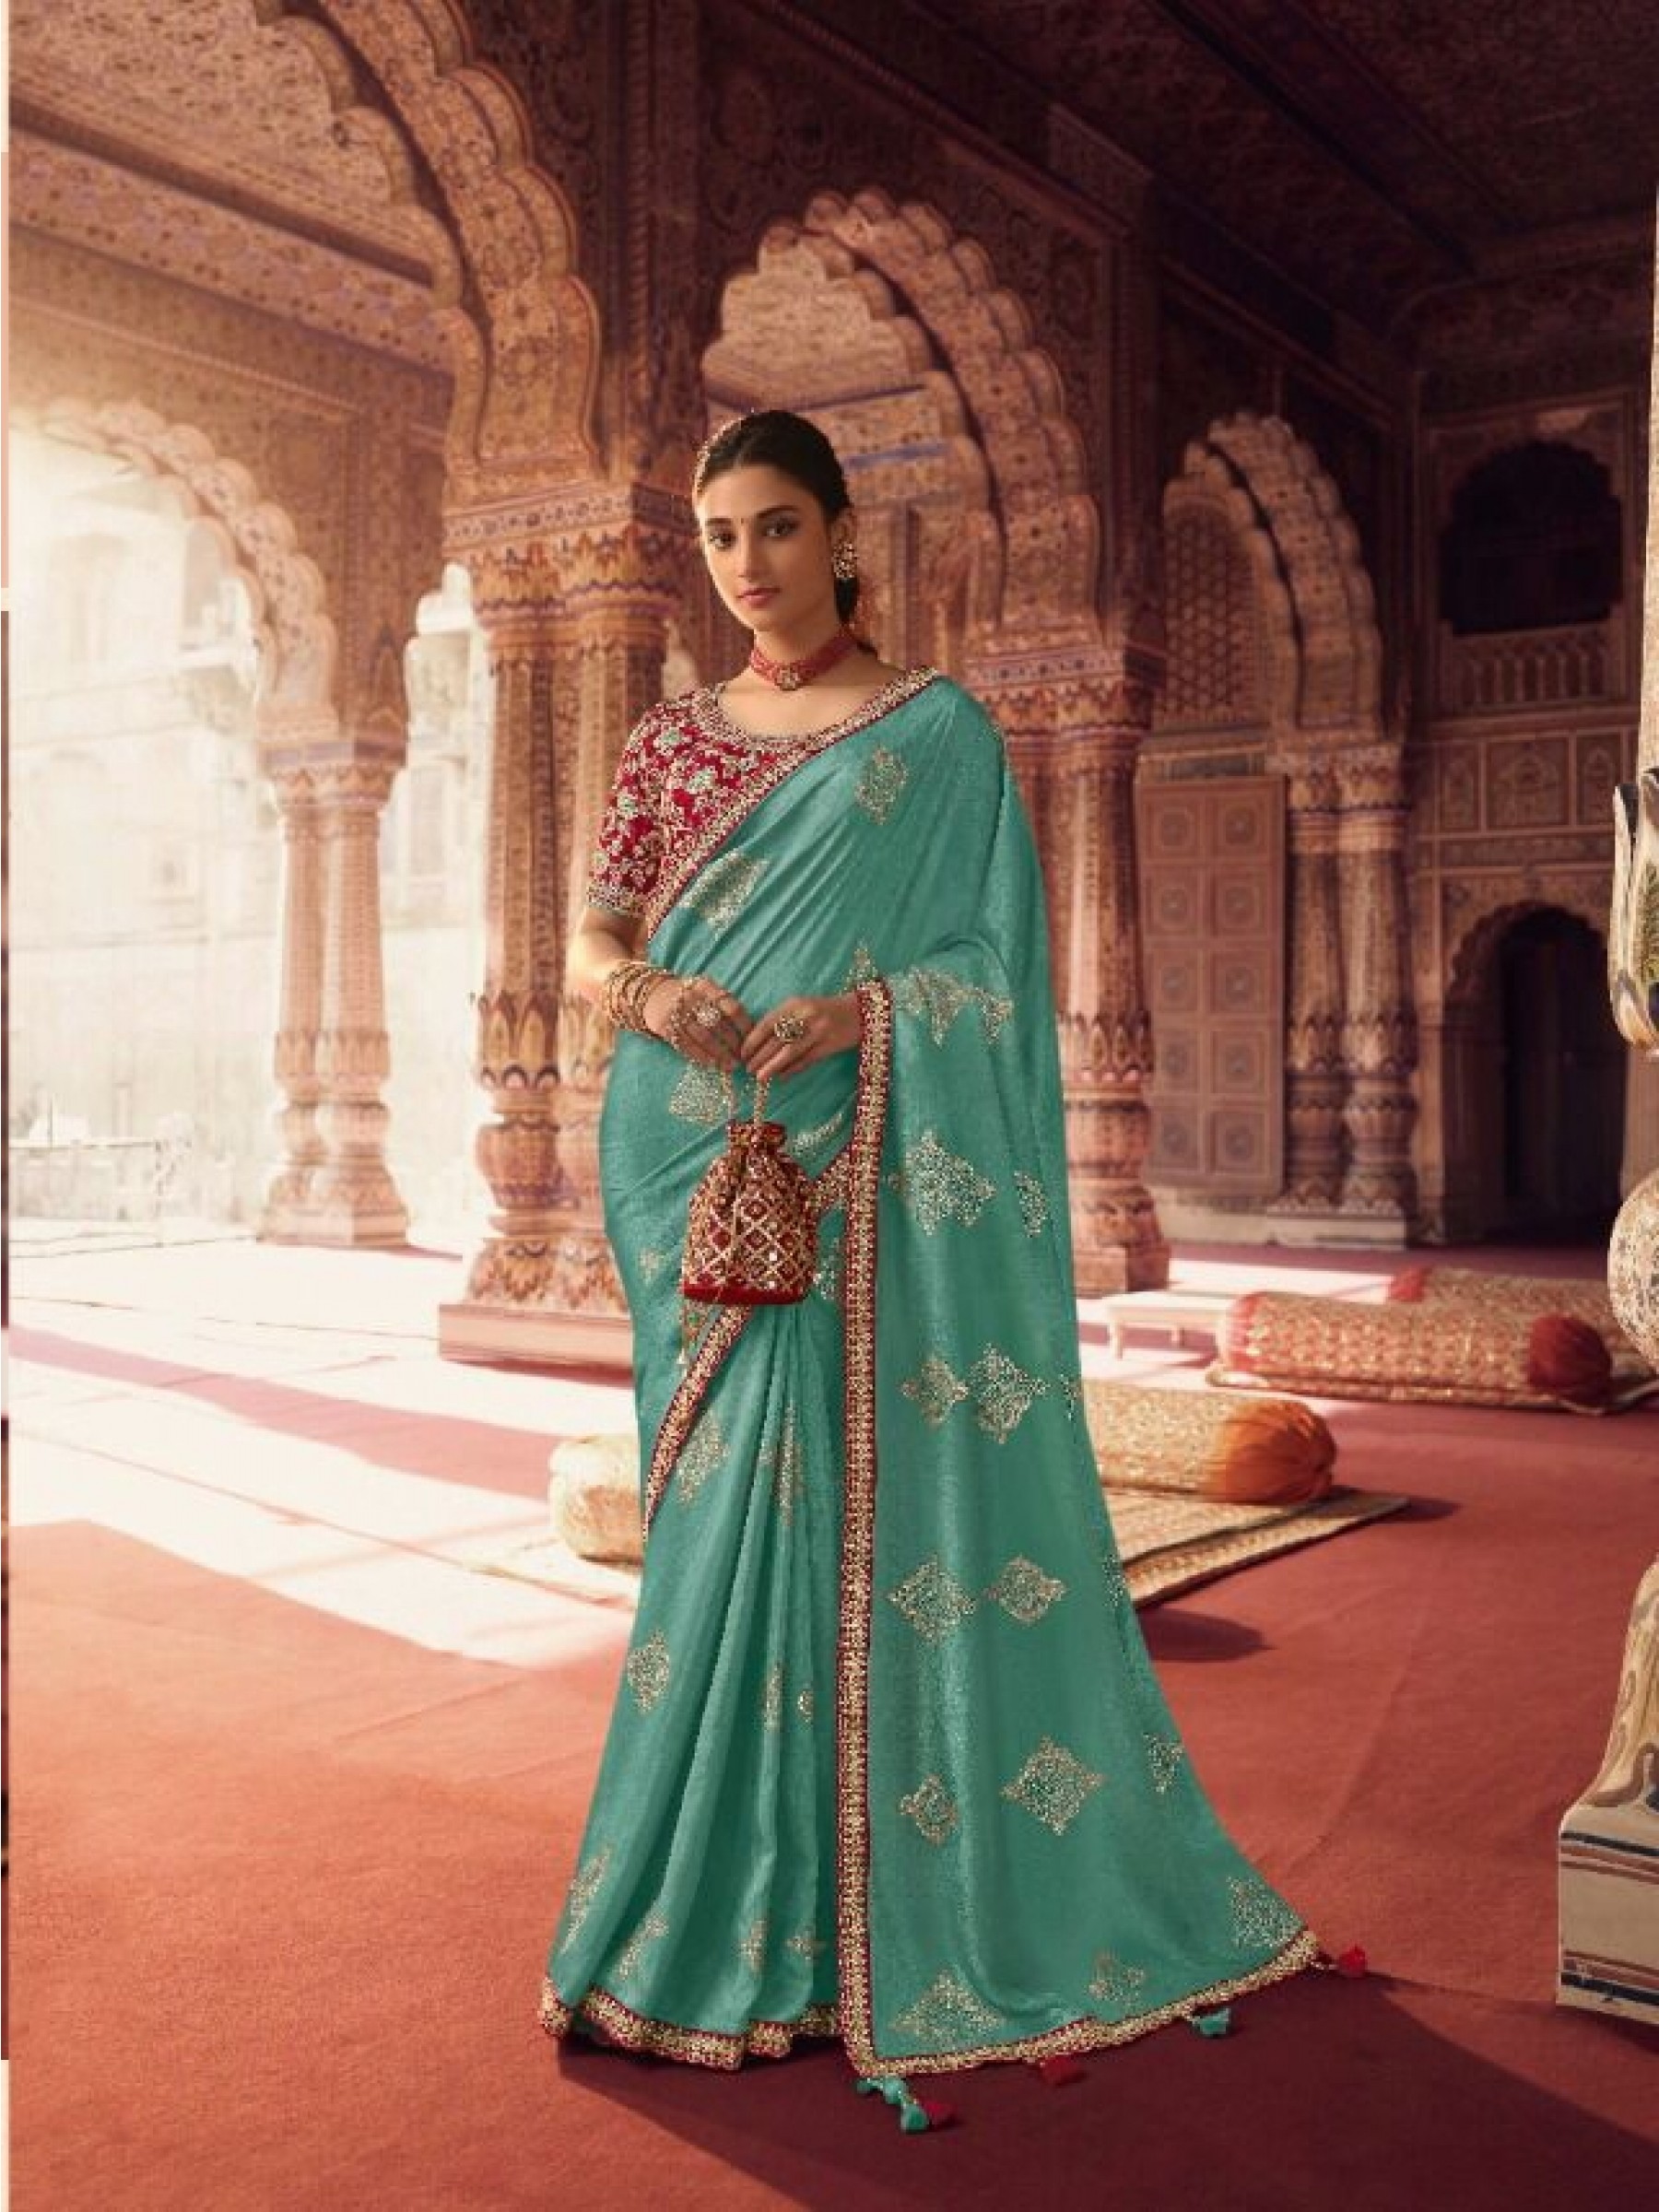 Dola Silk  Saree Turquoise Color With Embroidery Work